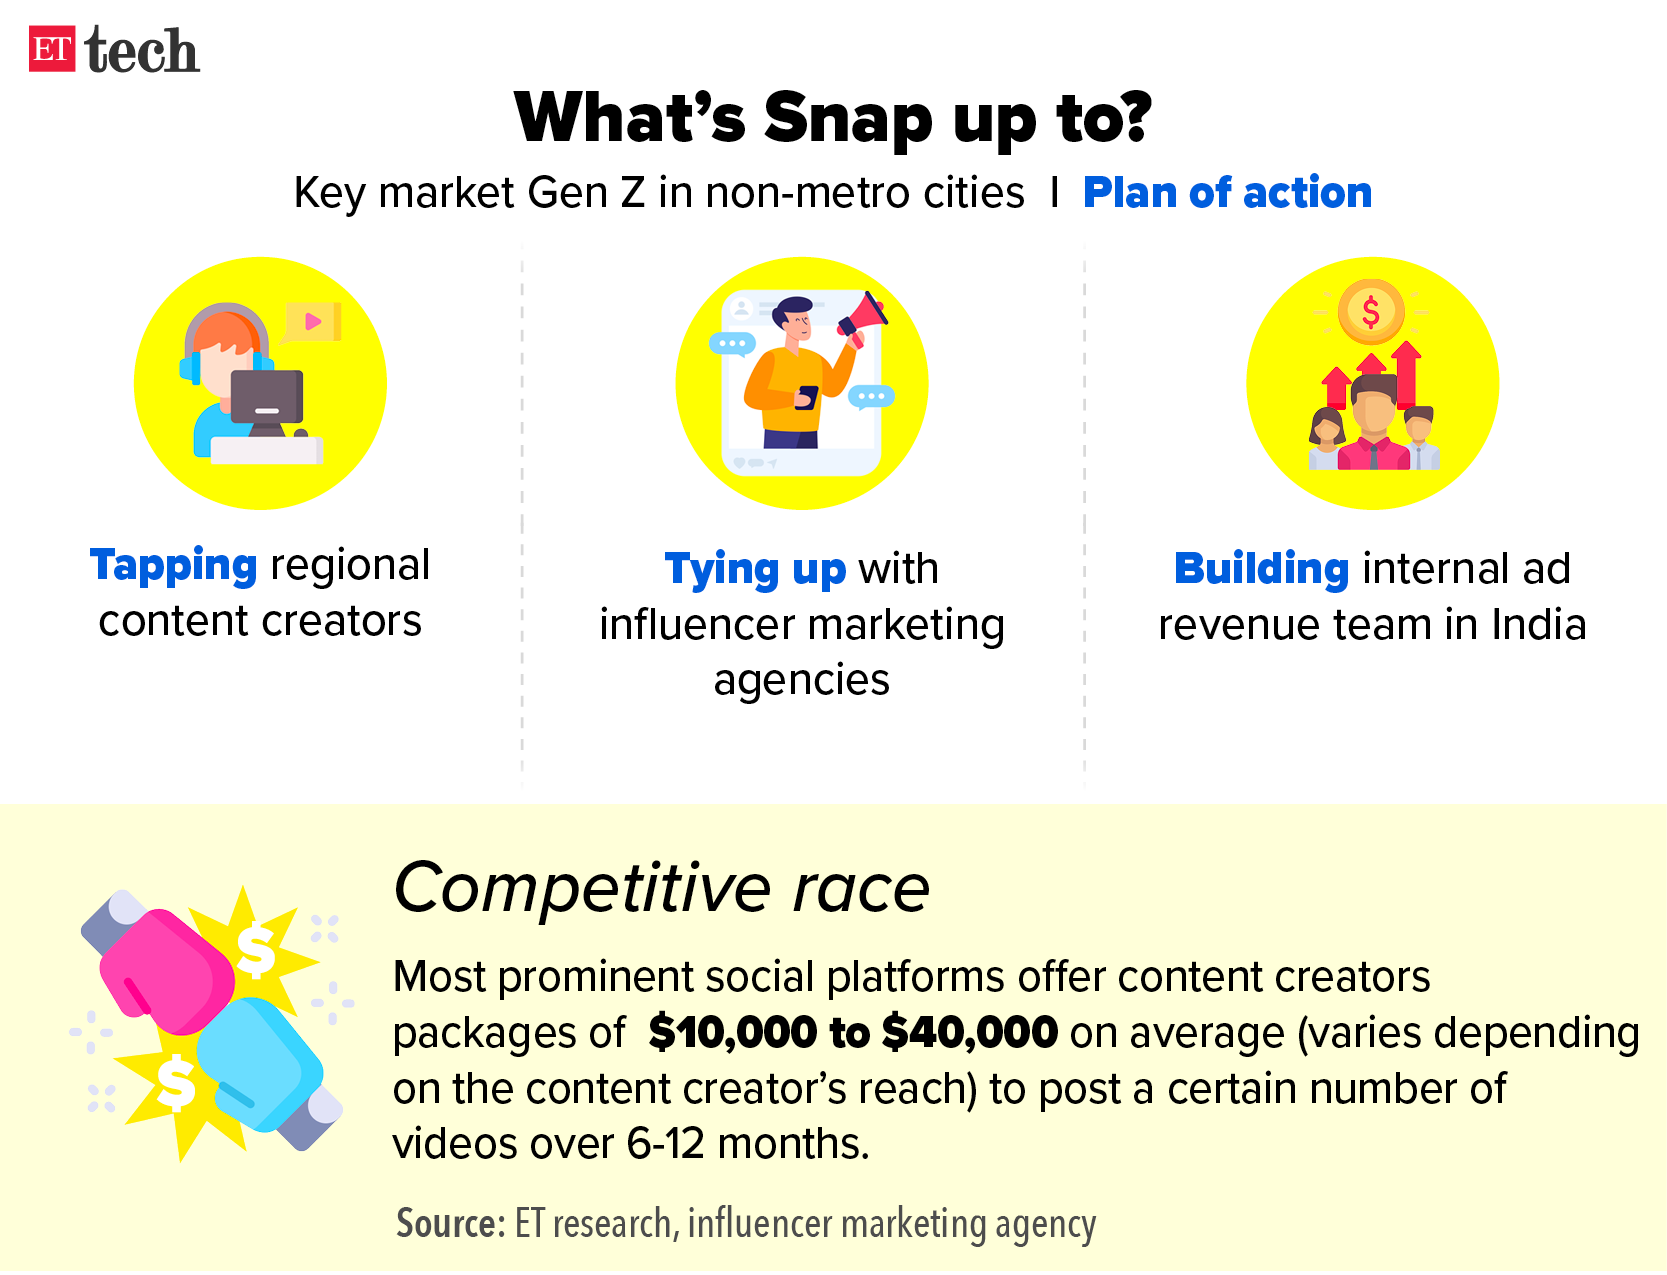 What is Snap upto